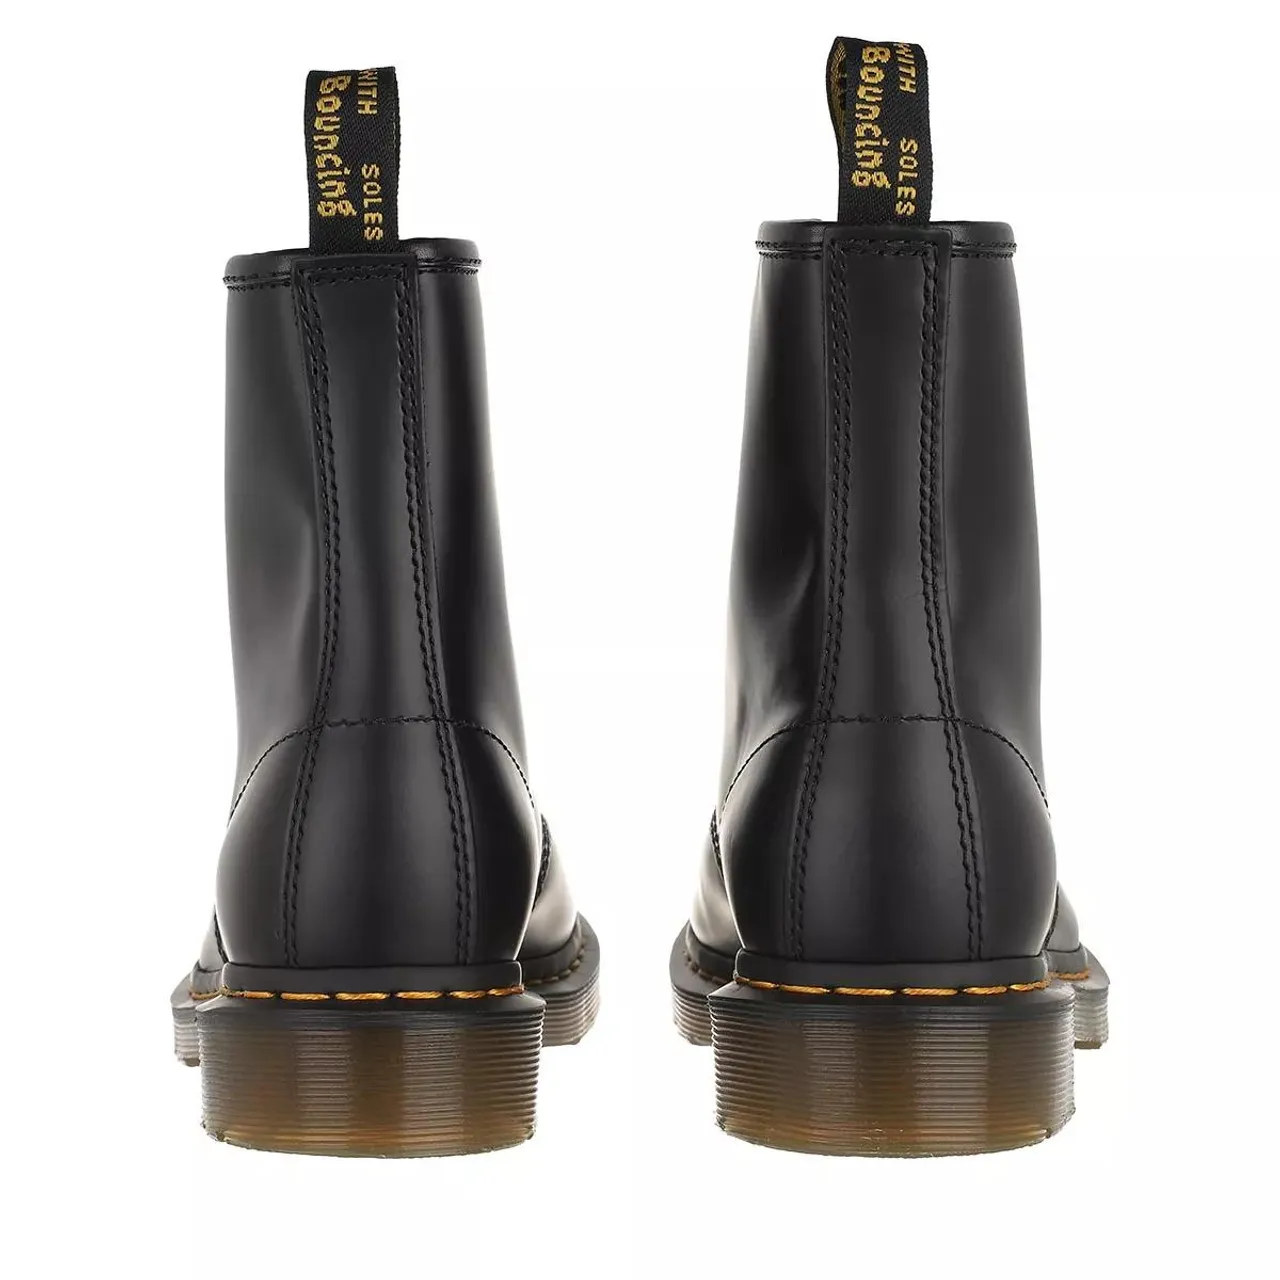 Dr. Martens Boots & Ankle Boots - 1460 Black Smooth Leather 8 Eye Boot - black - Boots & Ankle Boots for ladies